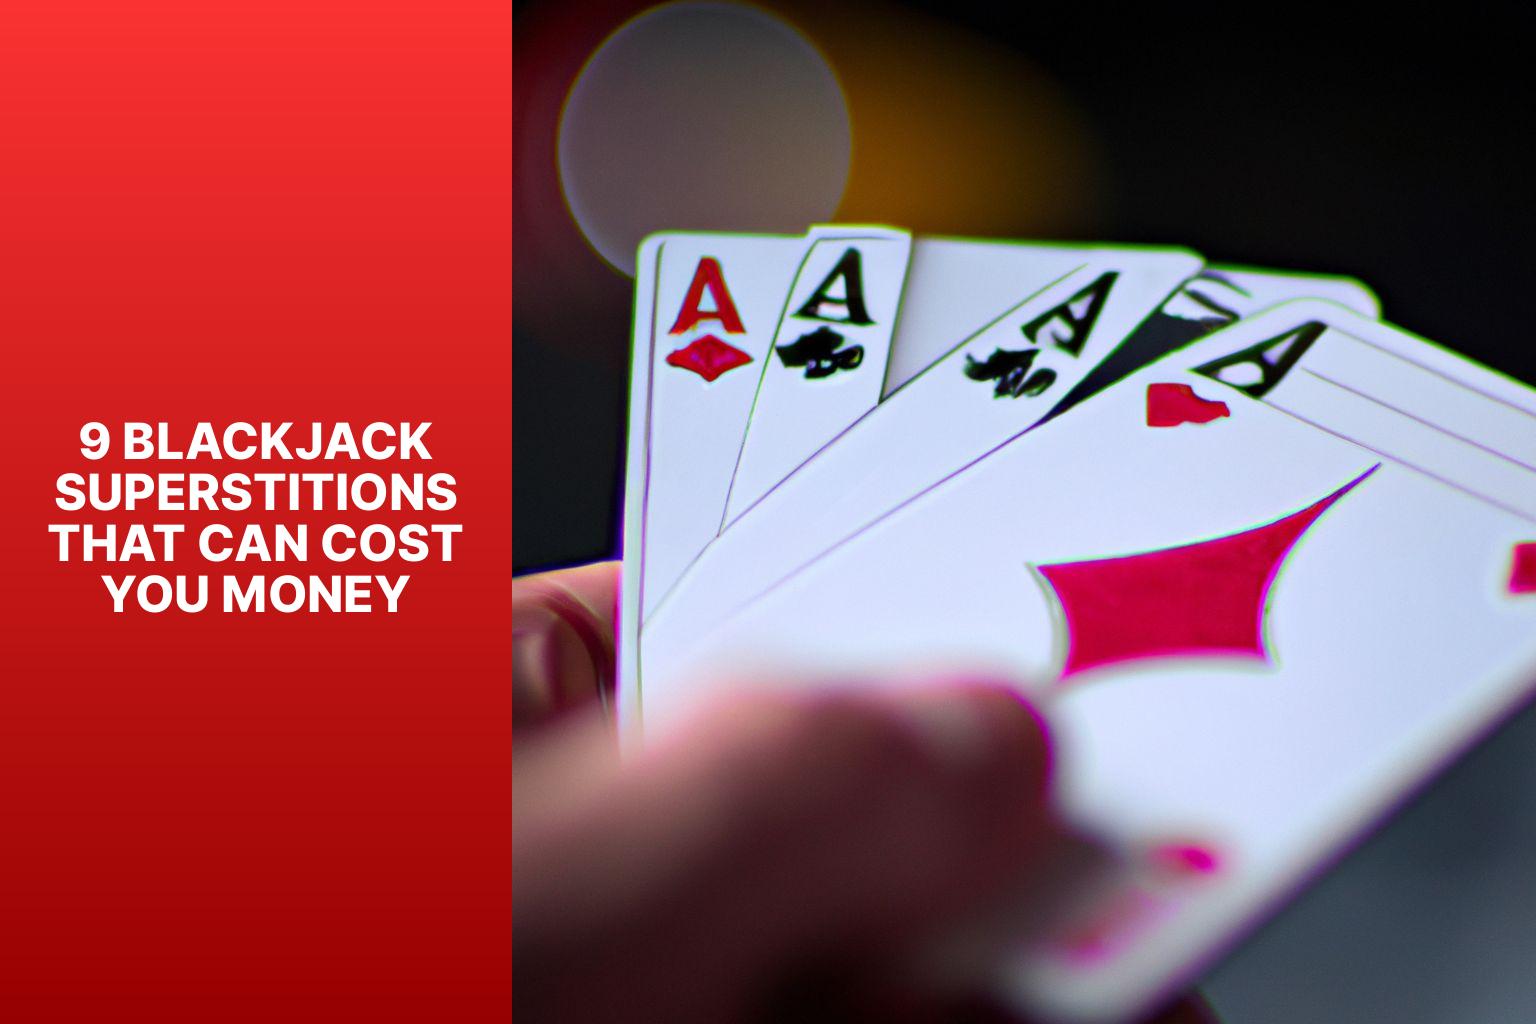 9 Blackjack Superstitions That Can Cost You Money